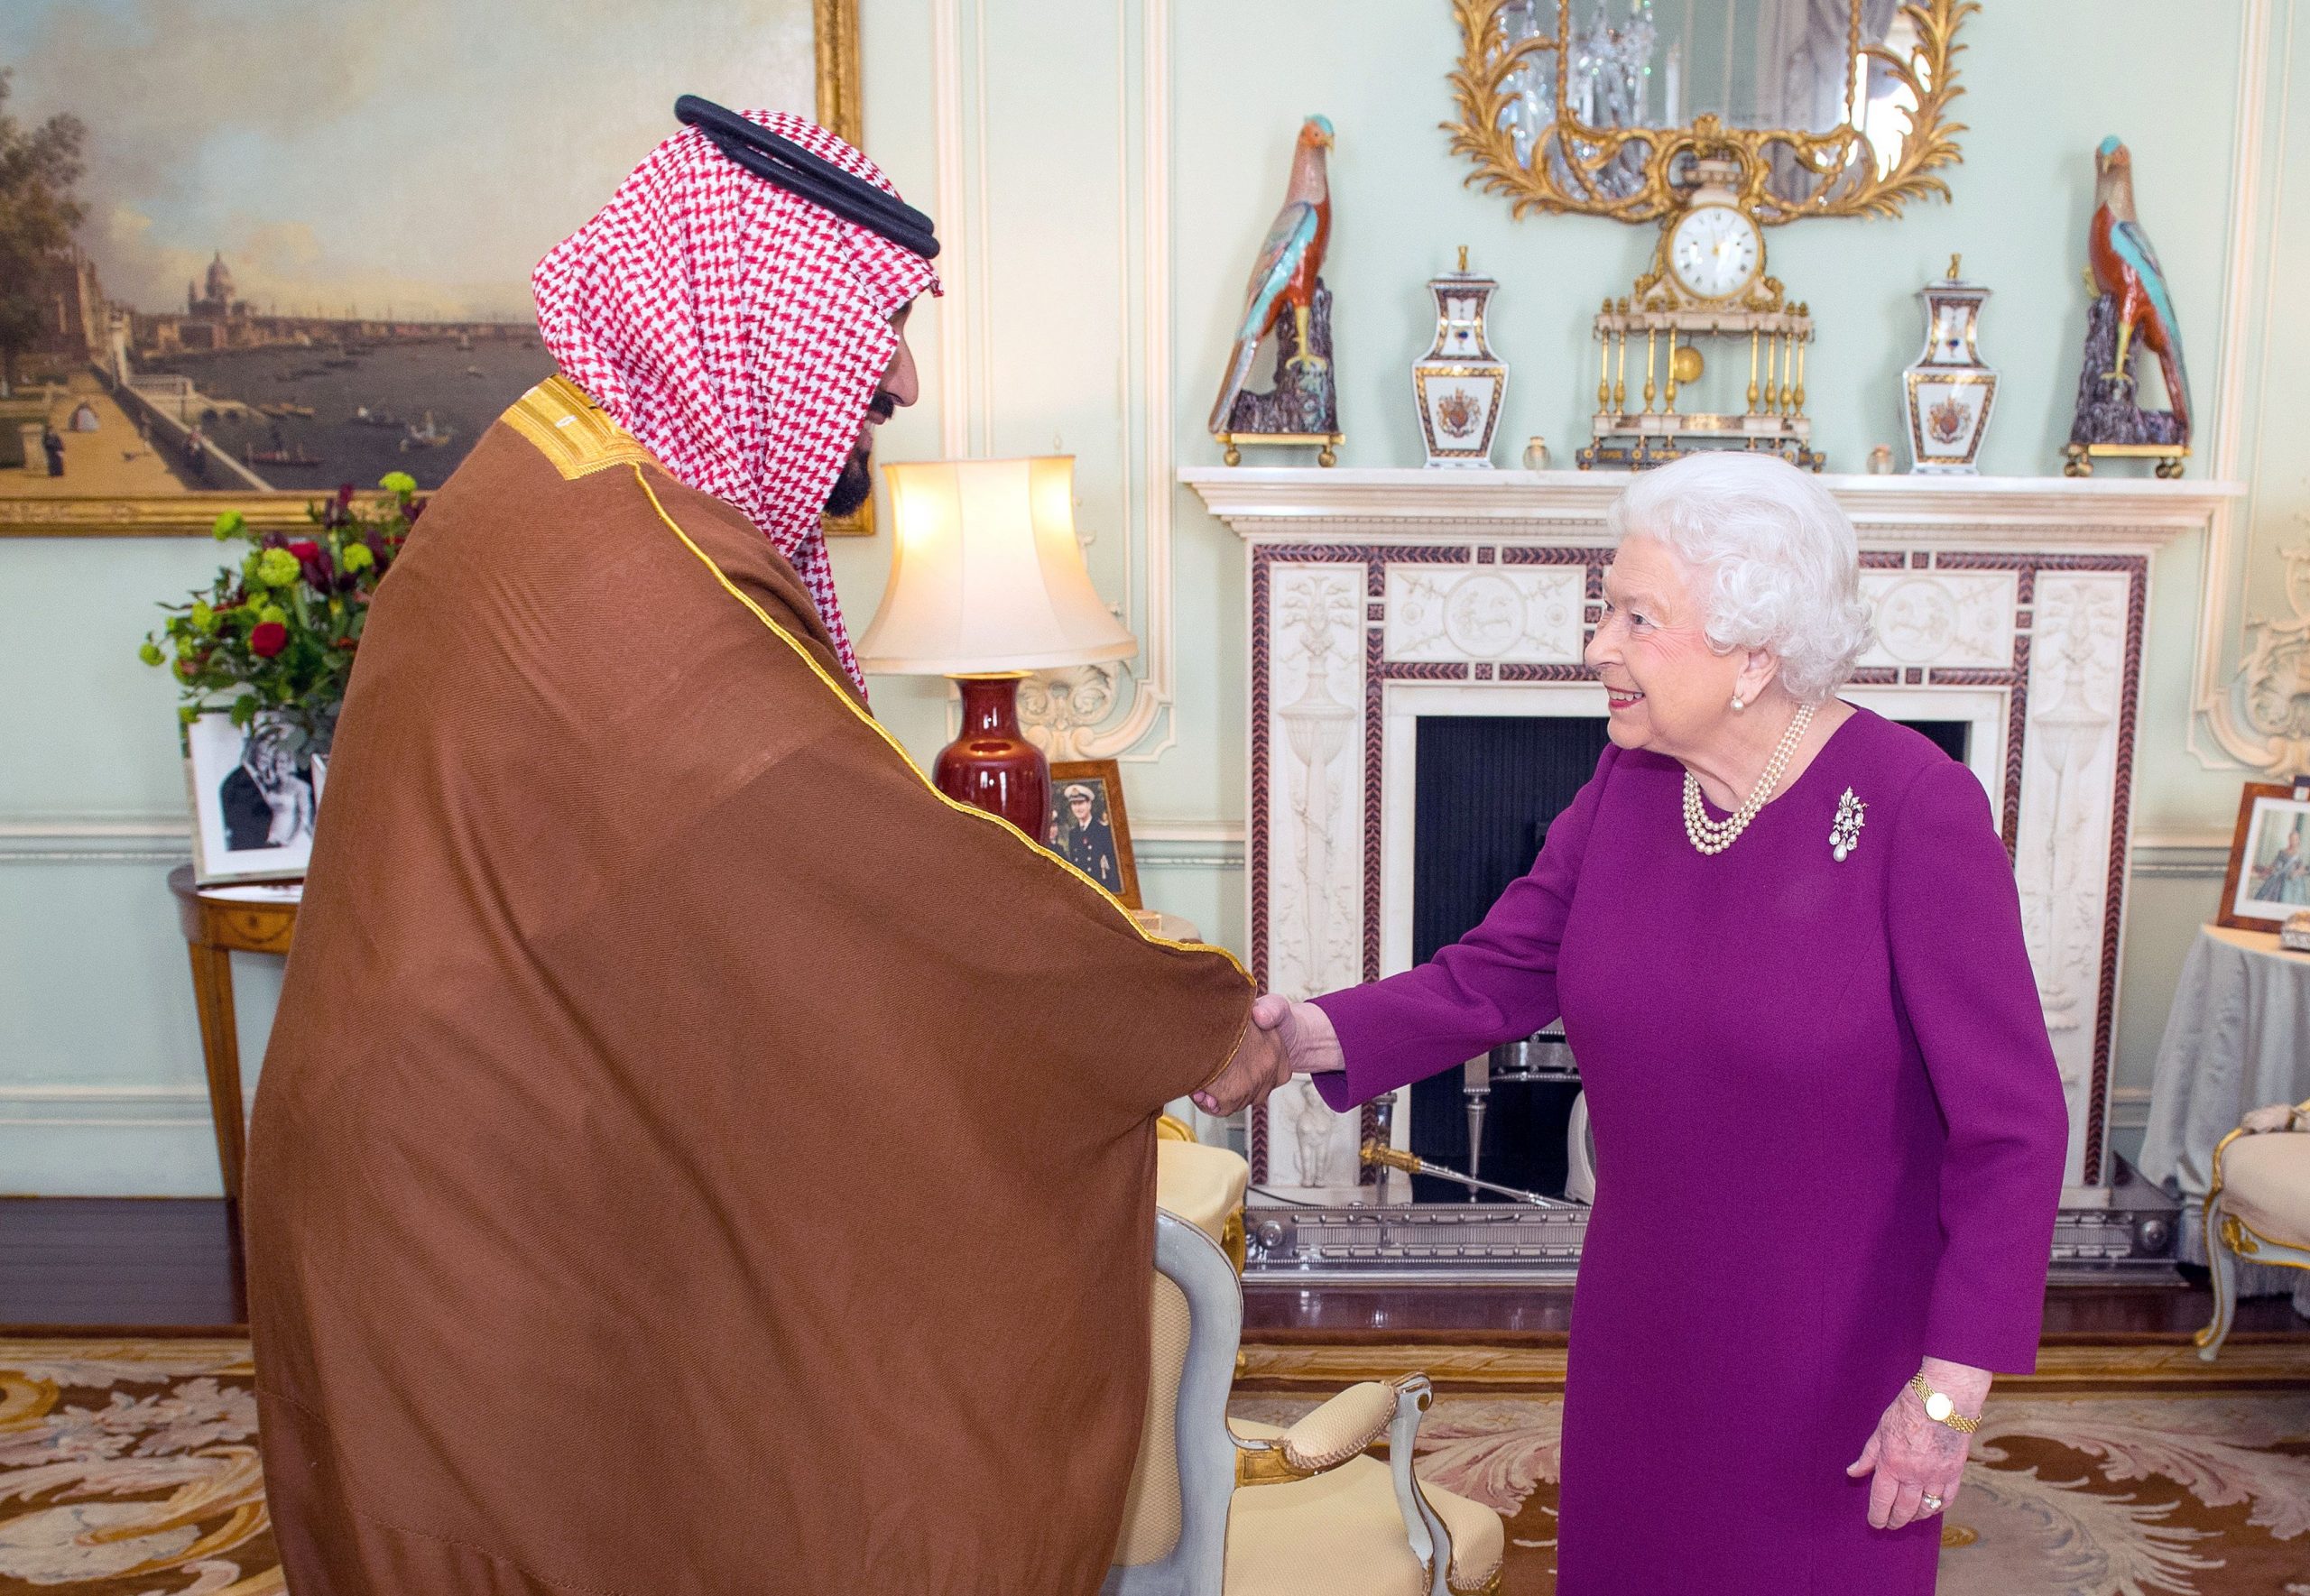 British royals met tyrannical Middle East monarchies over 200 times since Arab Spring